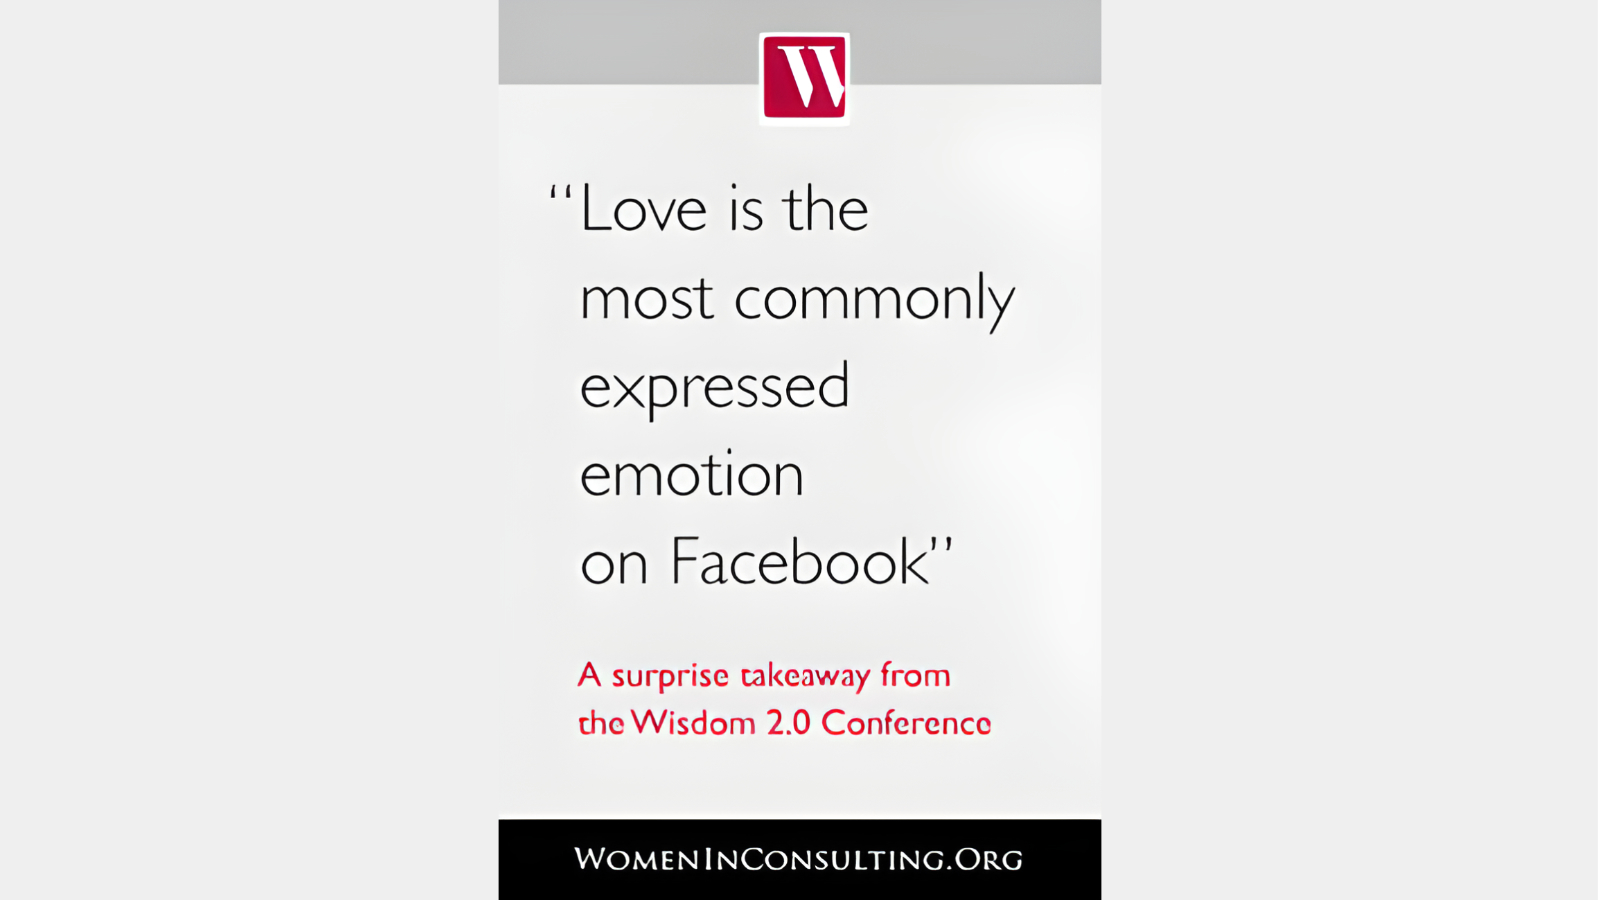 Love is the most commonly expressed emotion on Facebook